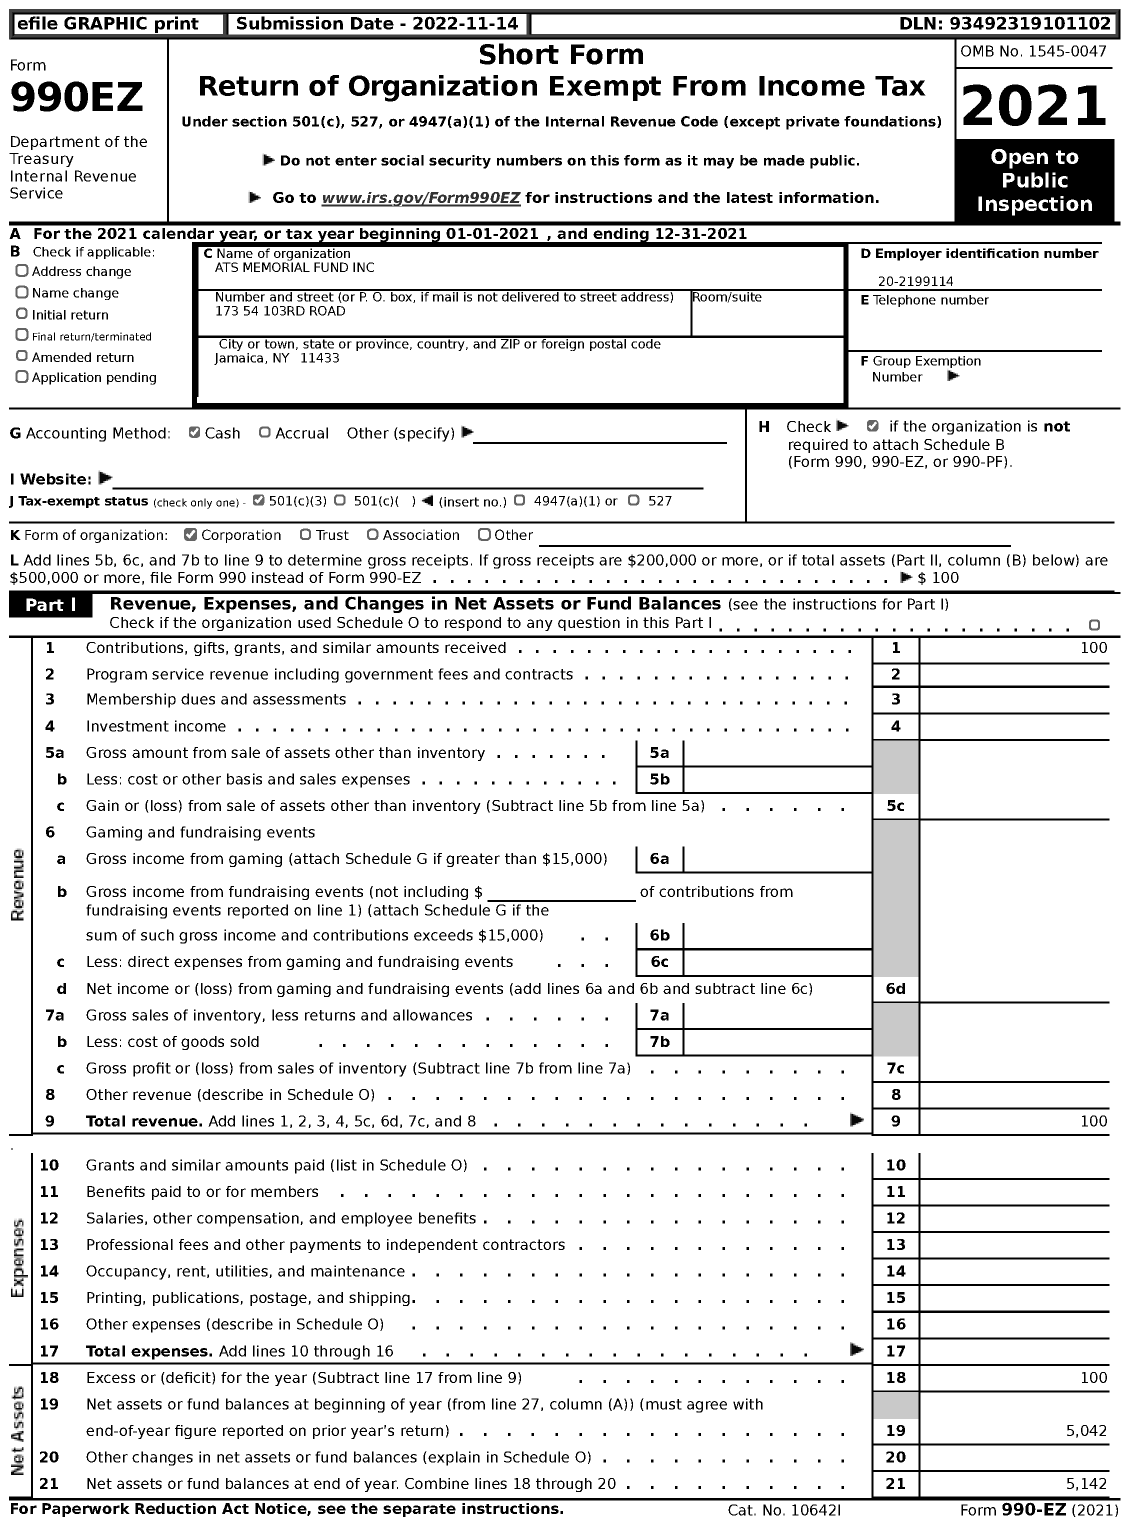 Image of first page of 2021 Form 990EZ for Ats Memorial Fund